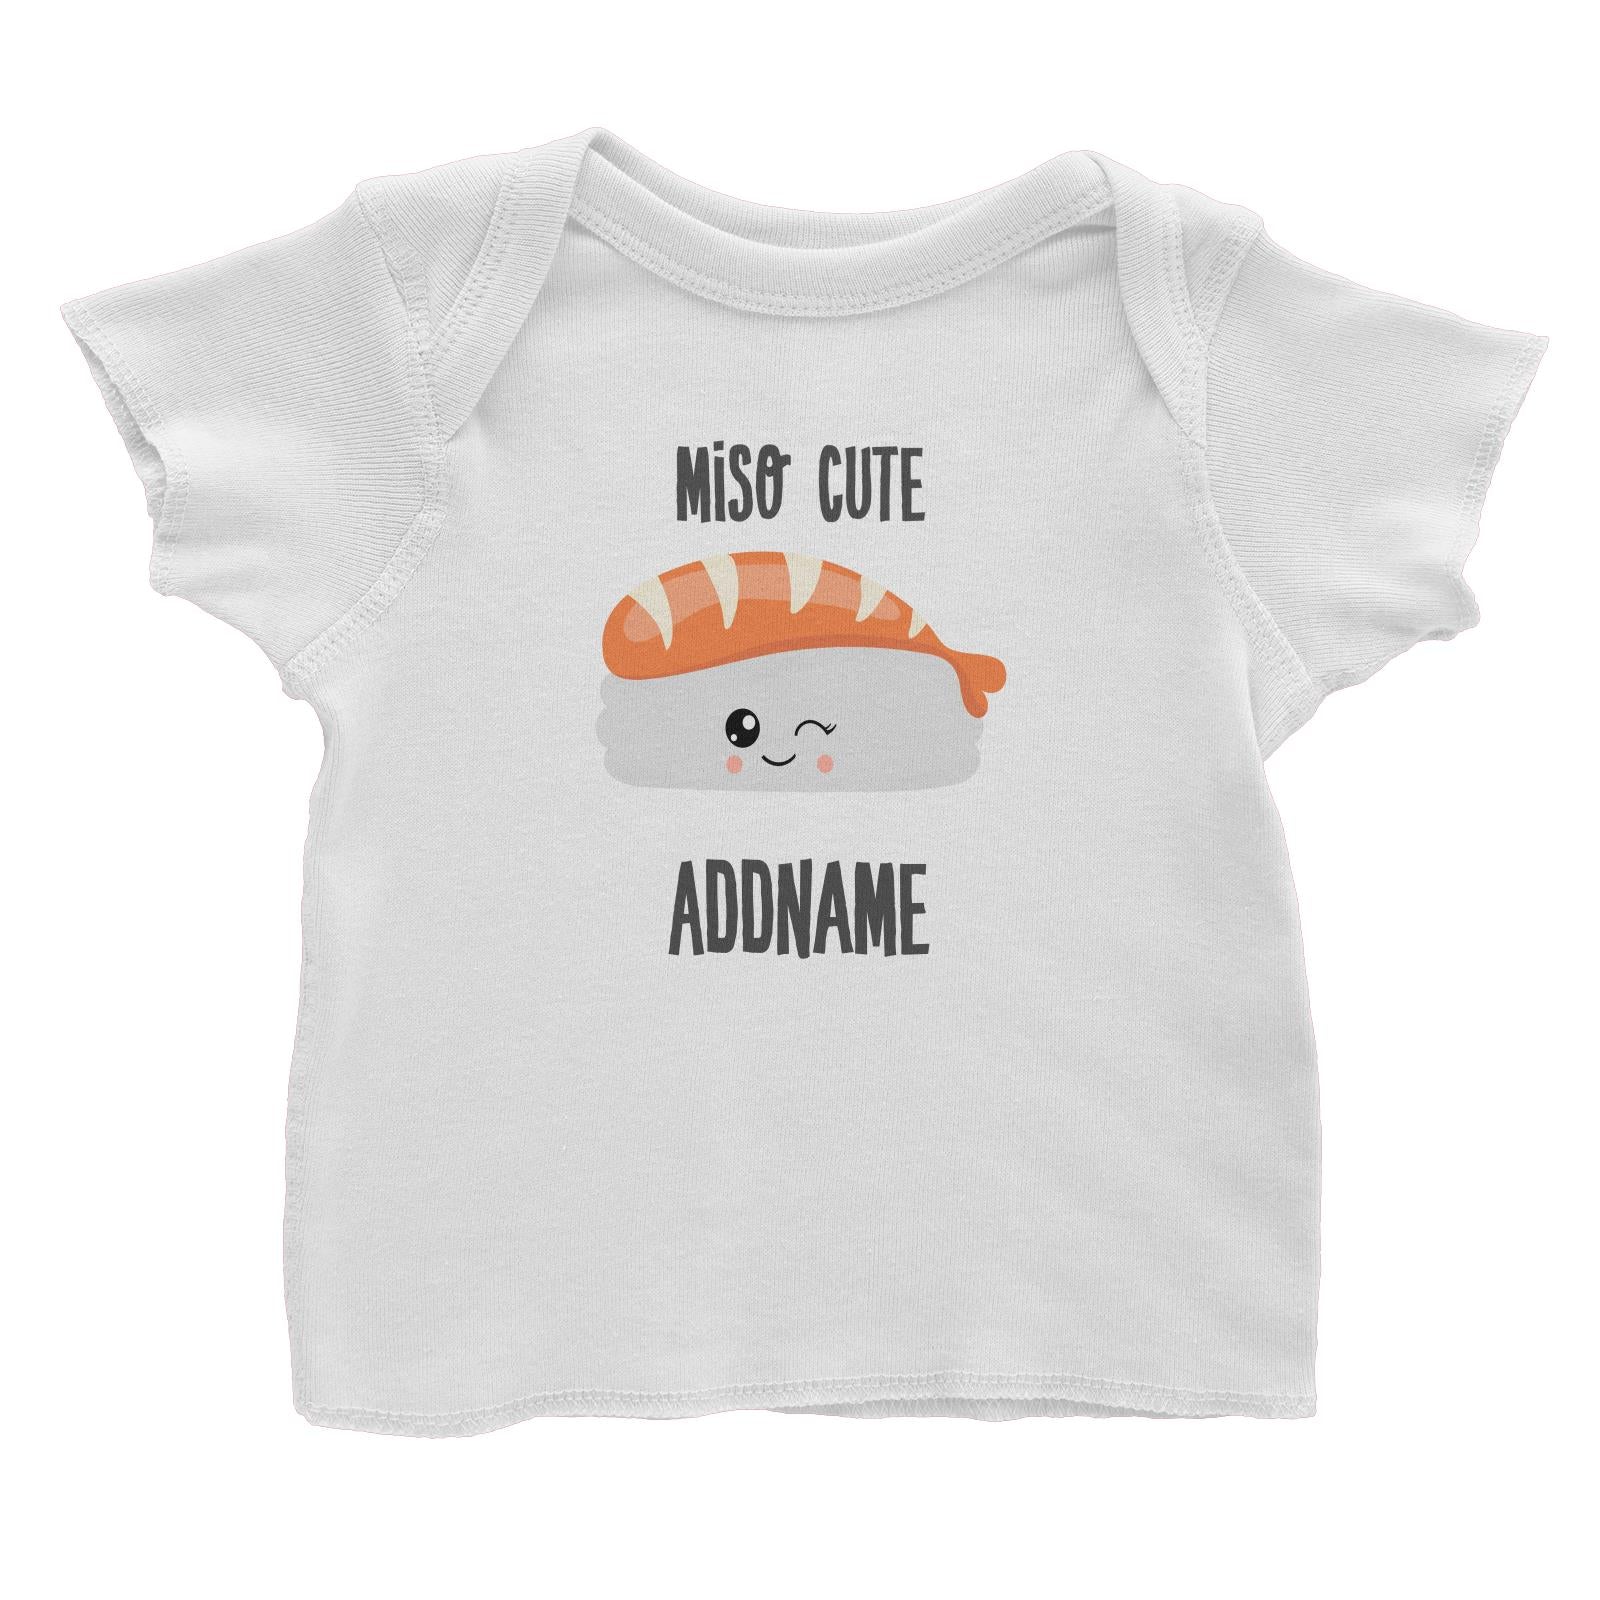 Miso Cute Salmon Sushi Addname Baby T-Shirt